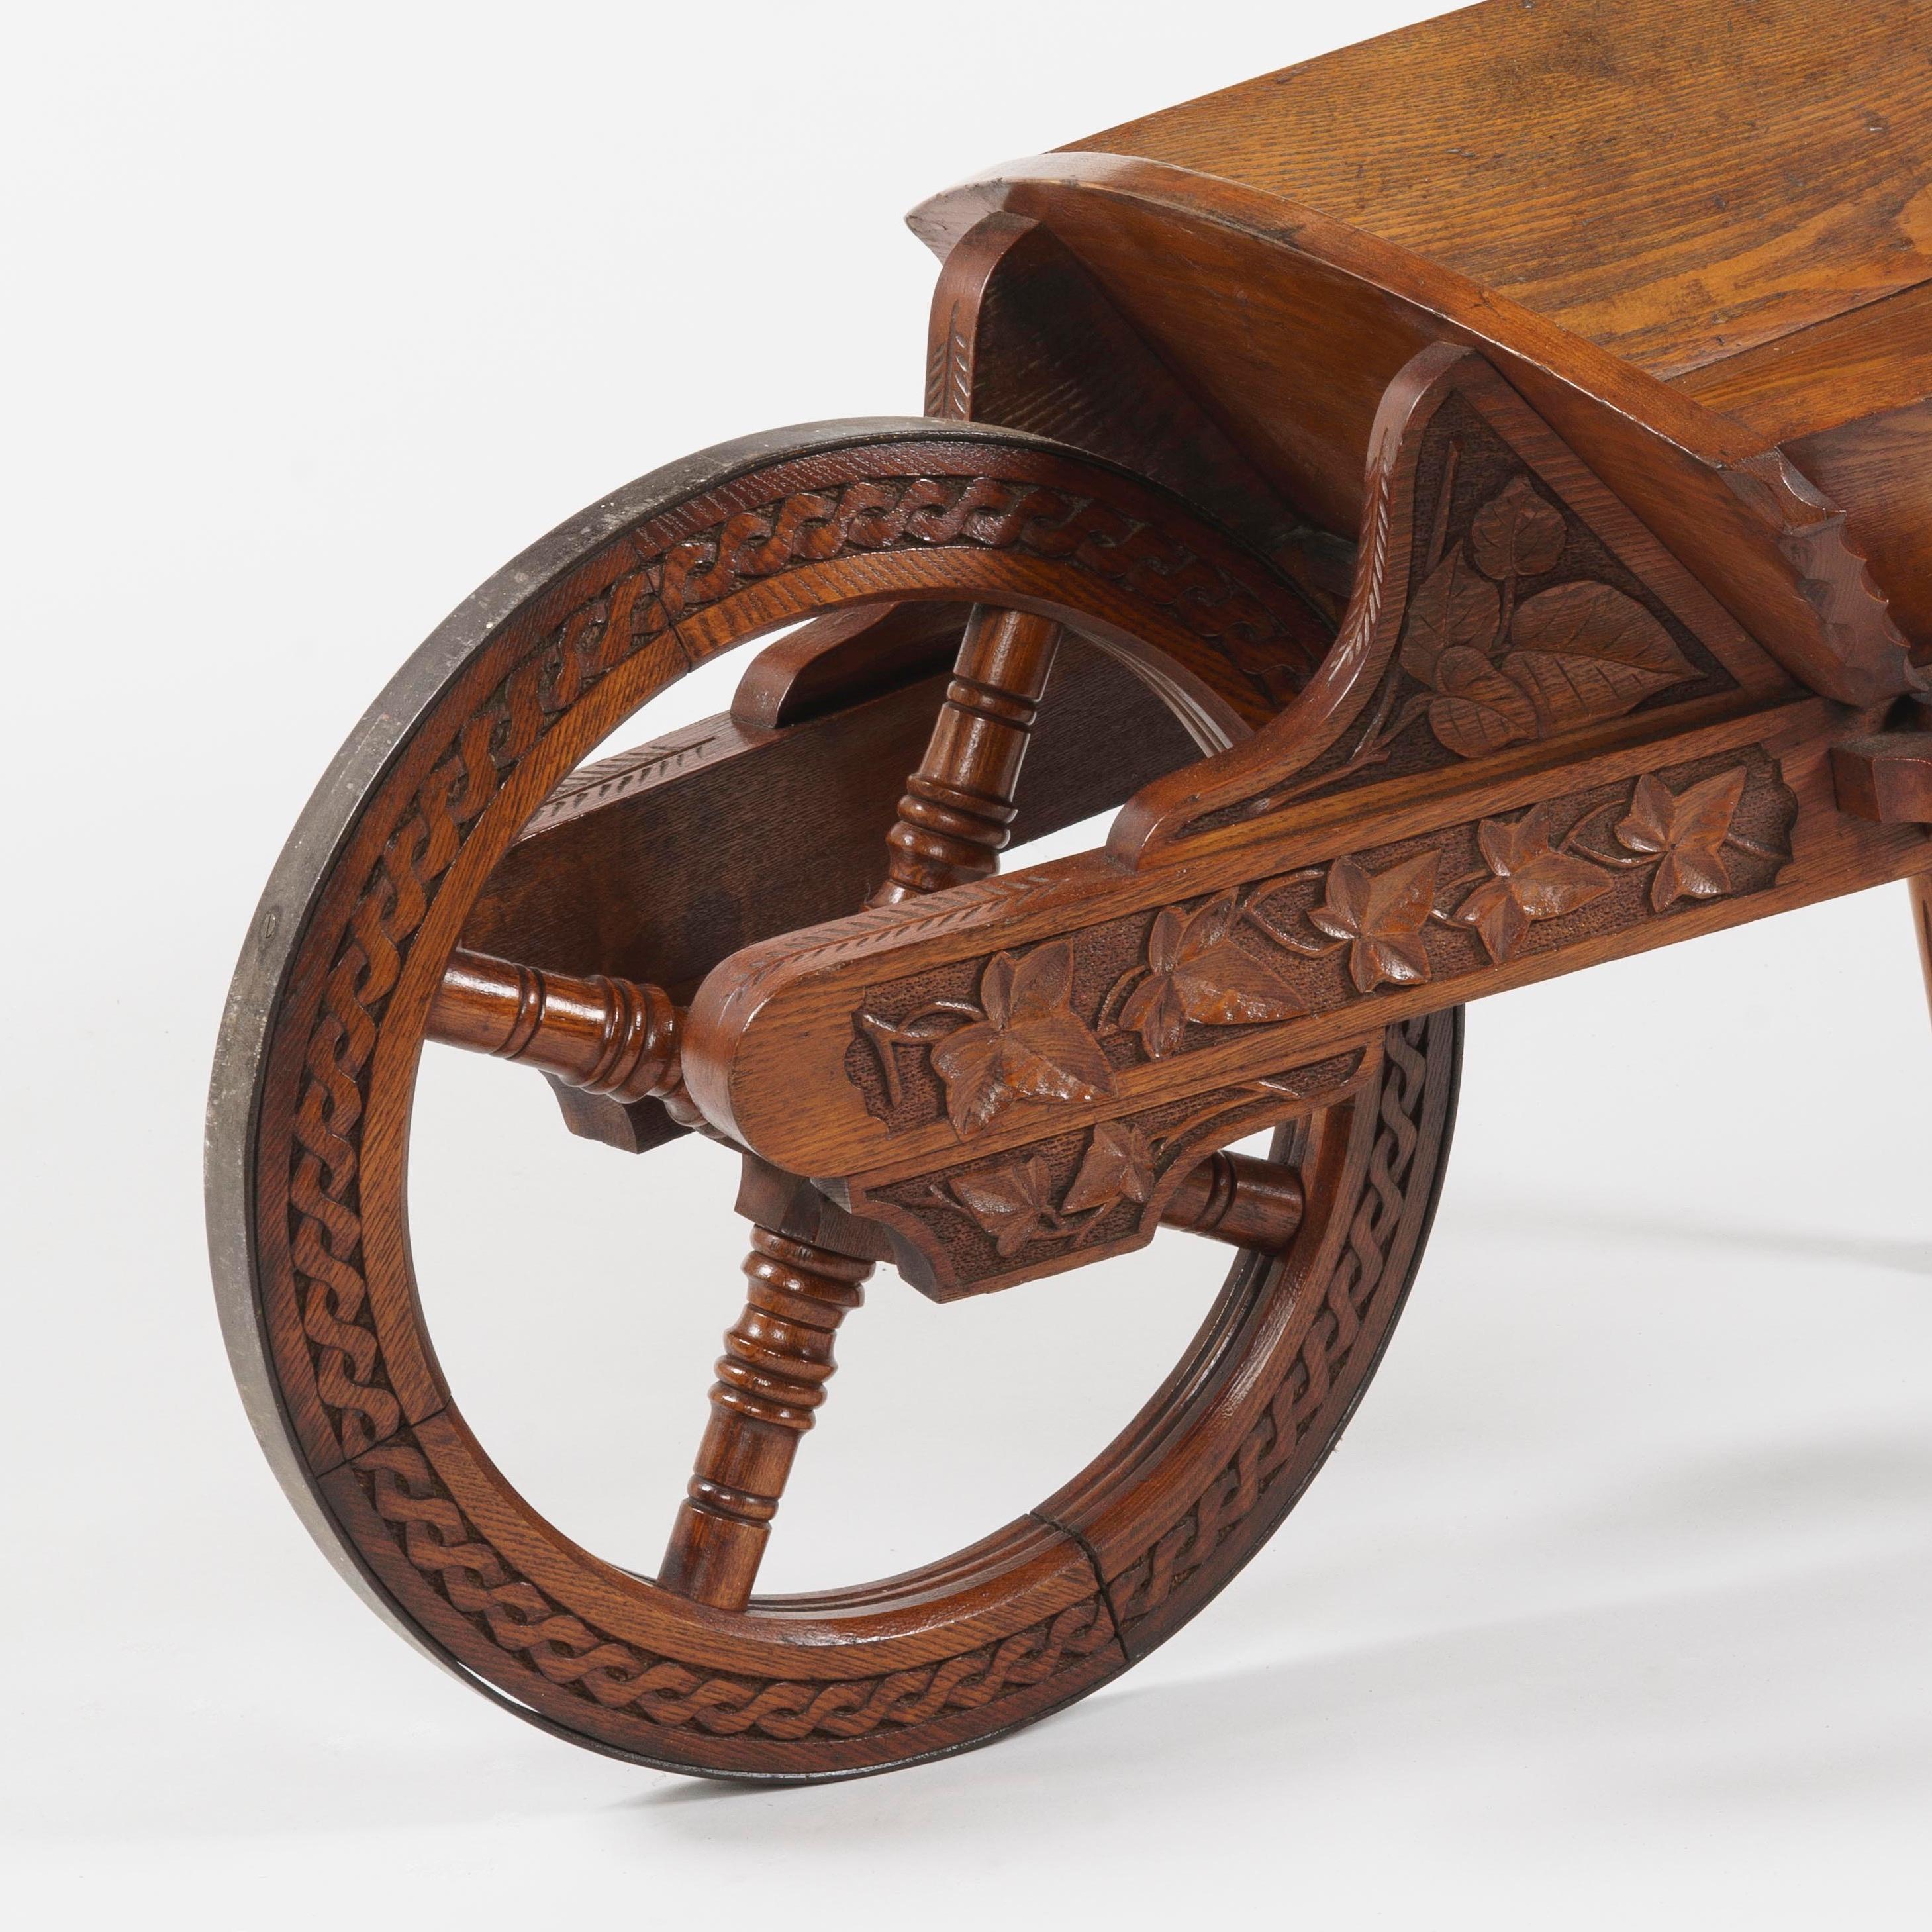 A late 19th century oak presentation wheelbarrow
Commemorating the Great Western Railway Extension

The presentation wheelbarrow carved from oak with finely carved ivy leaves and foliage adorning the frame, the front wheel with turned spokes and